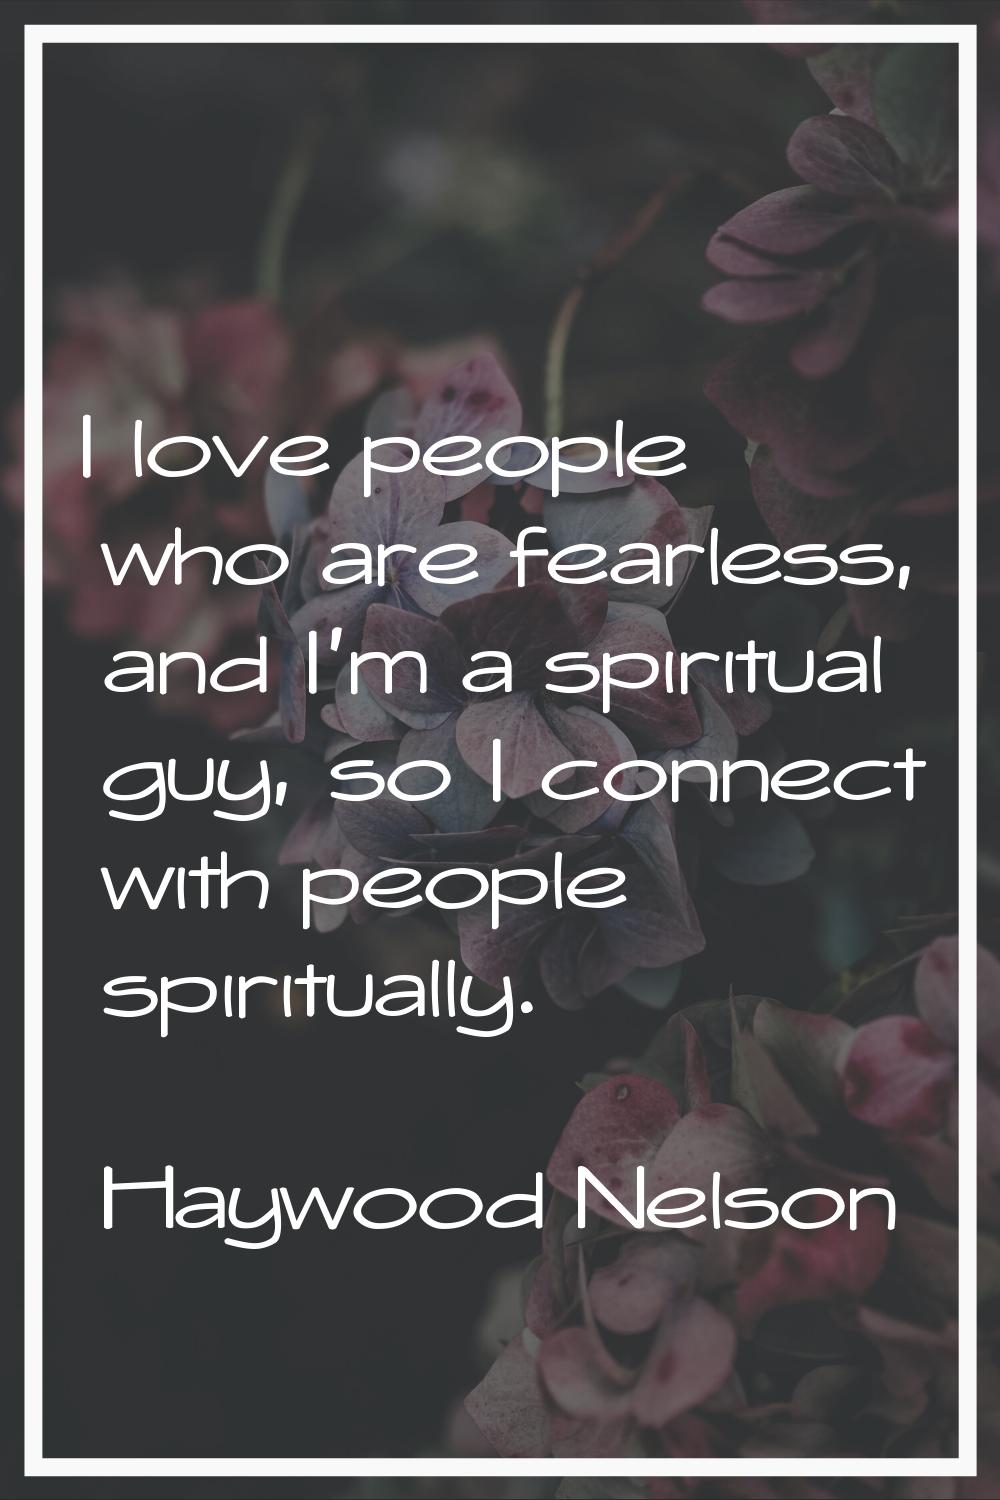 I love people who are fearless, and I'm a spiritual guy, so I connect with people spiritually.